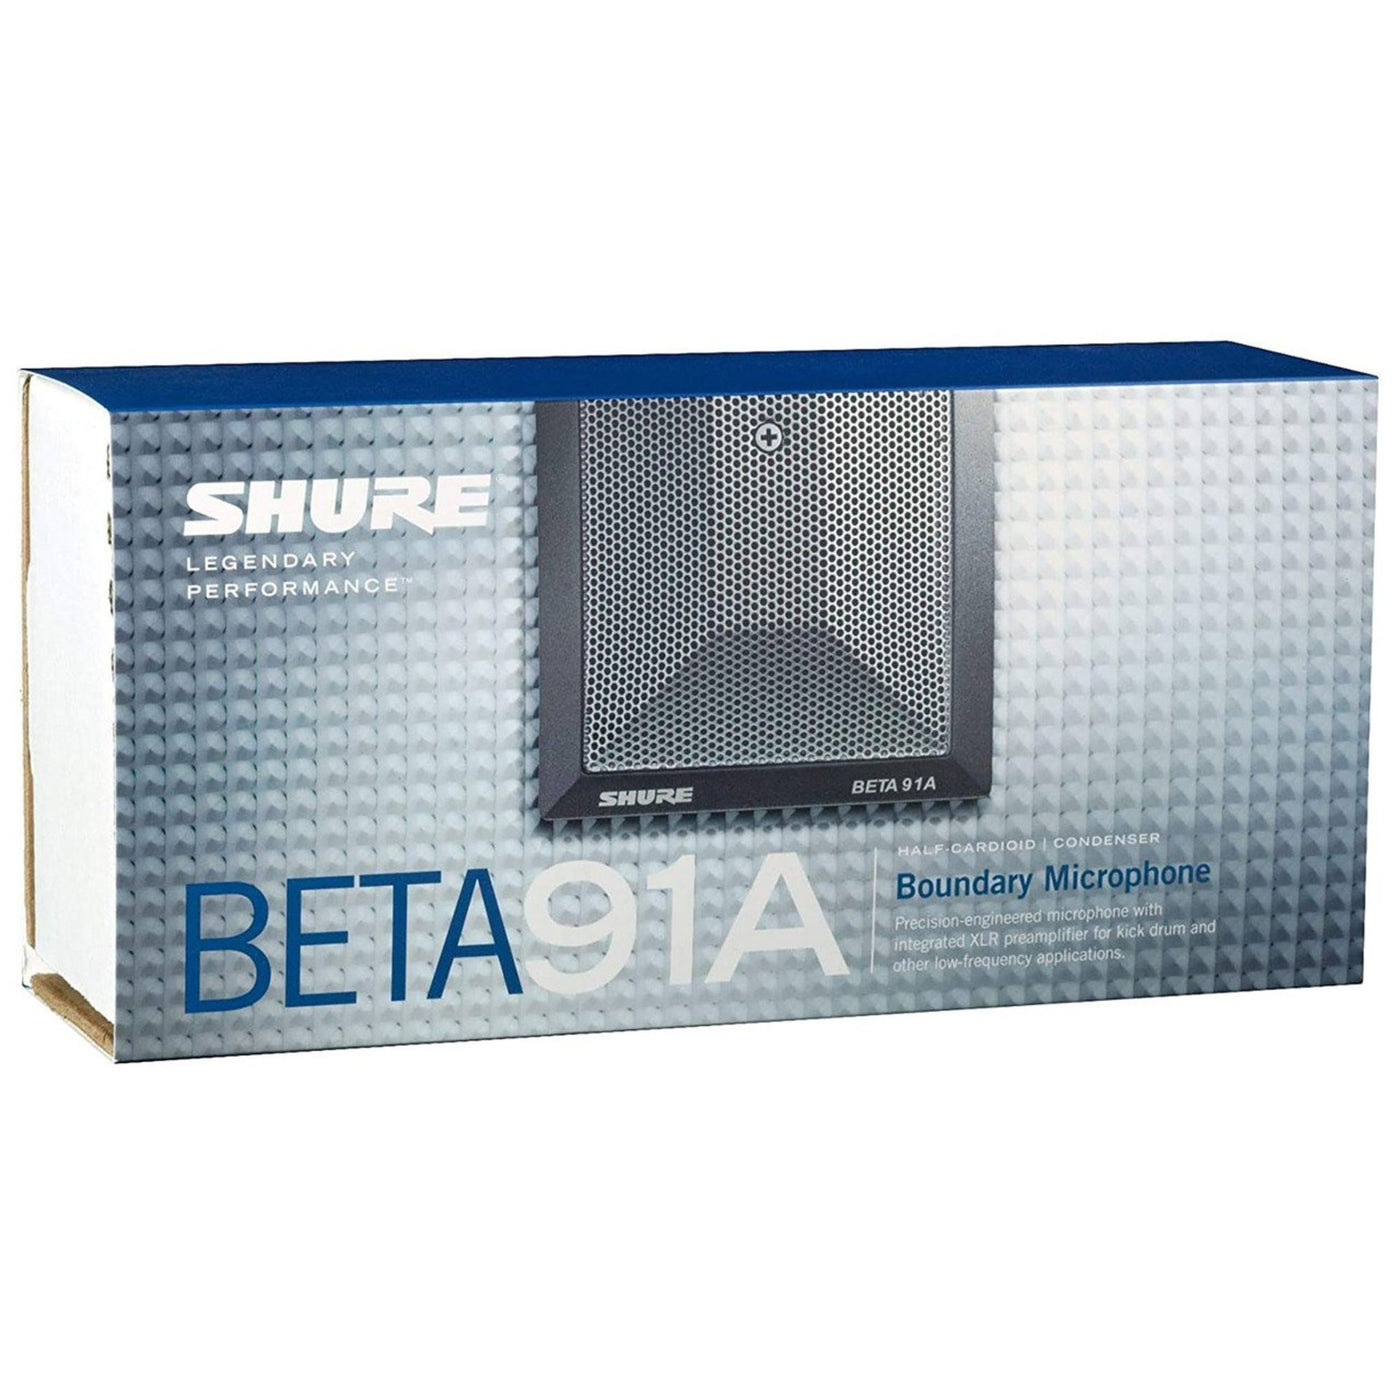 Shure BETA 91A Half-Cardioid Condenser Kick-Drum Microphone (Includes Integrated Preamplifier and XLR Connection)